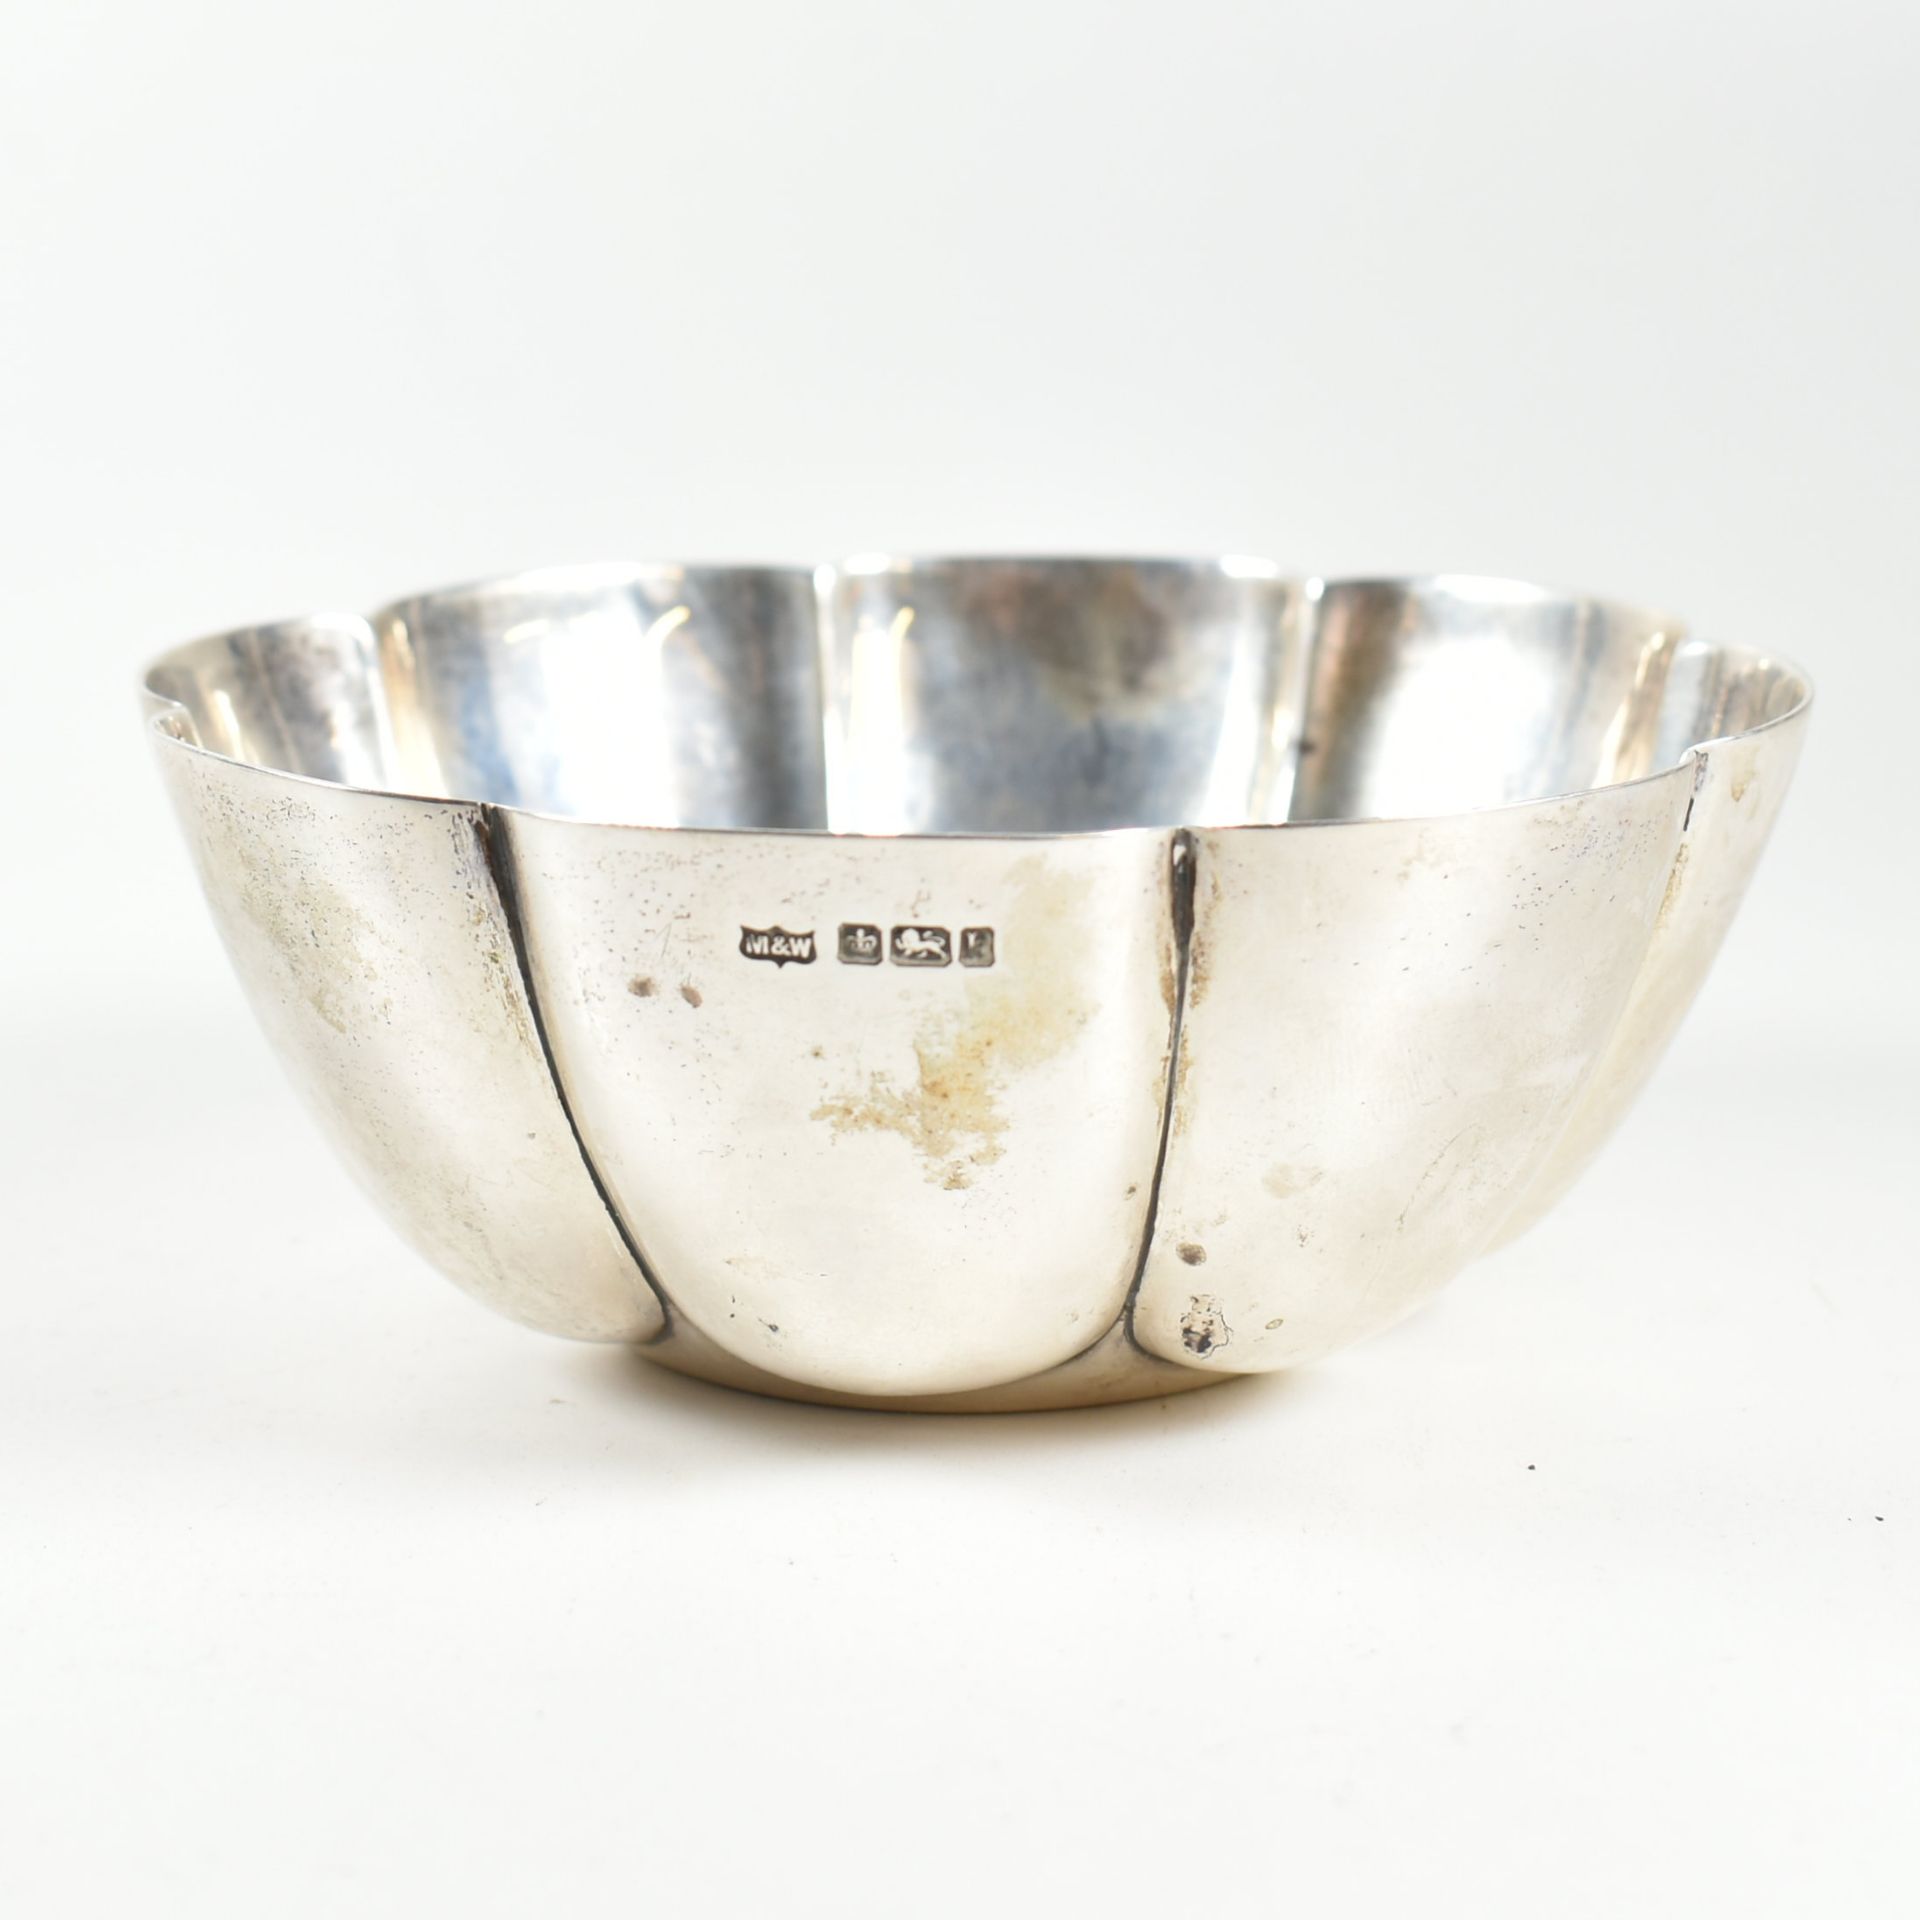 EDWARD VII HALLMARKED SILVER BOWL & OTHER NAPKIN RINGS - Image 5 of 6